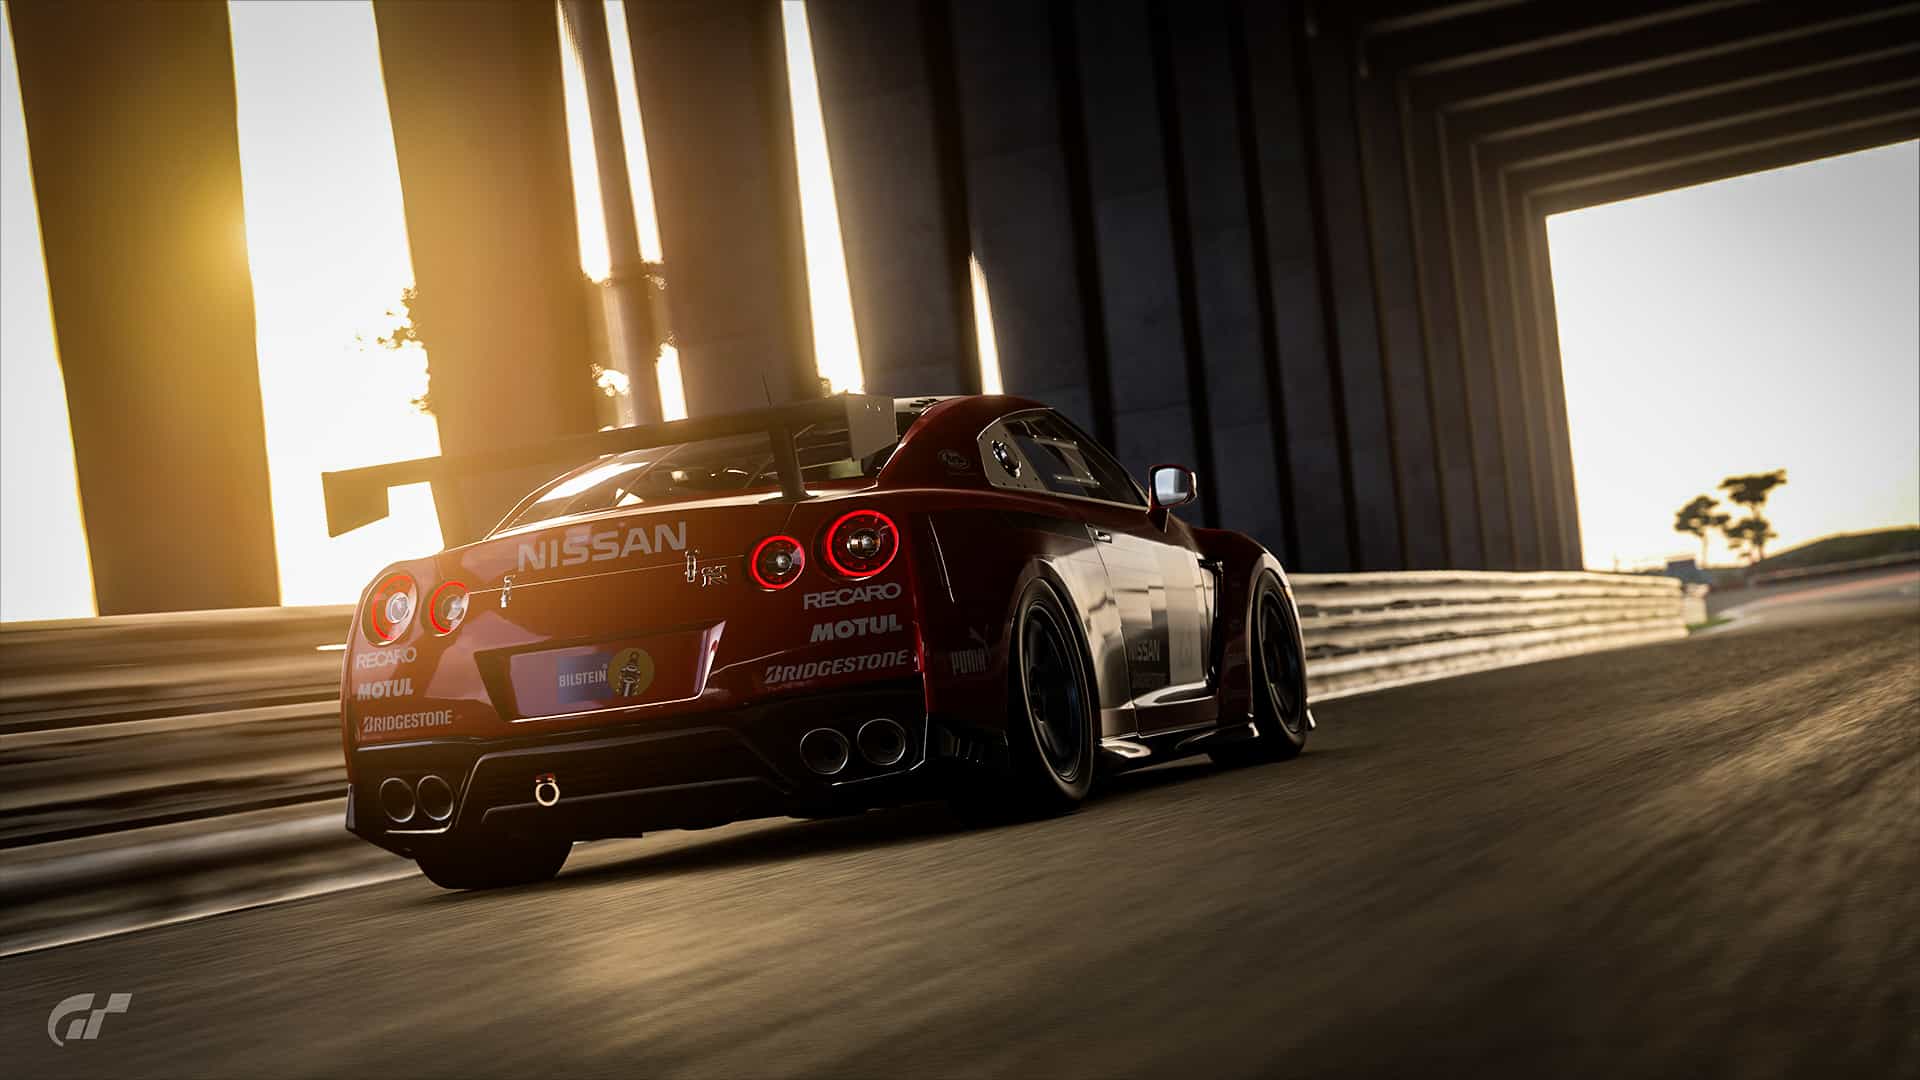 Your guide to Gran Turismo 7's Lap Time Challenge, 18th August - 1st September: Godzilla's beach holiday